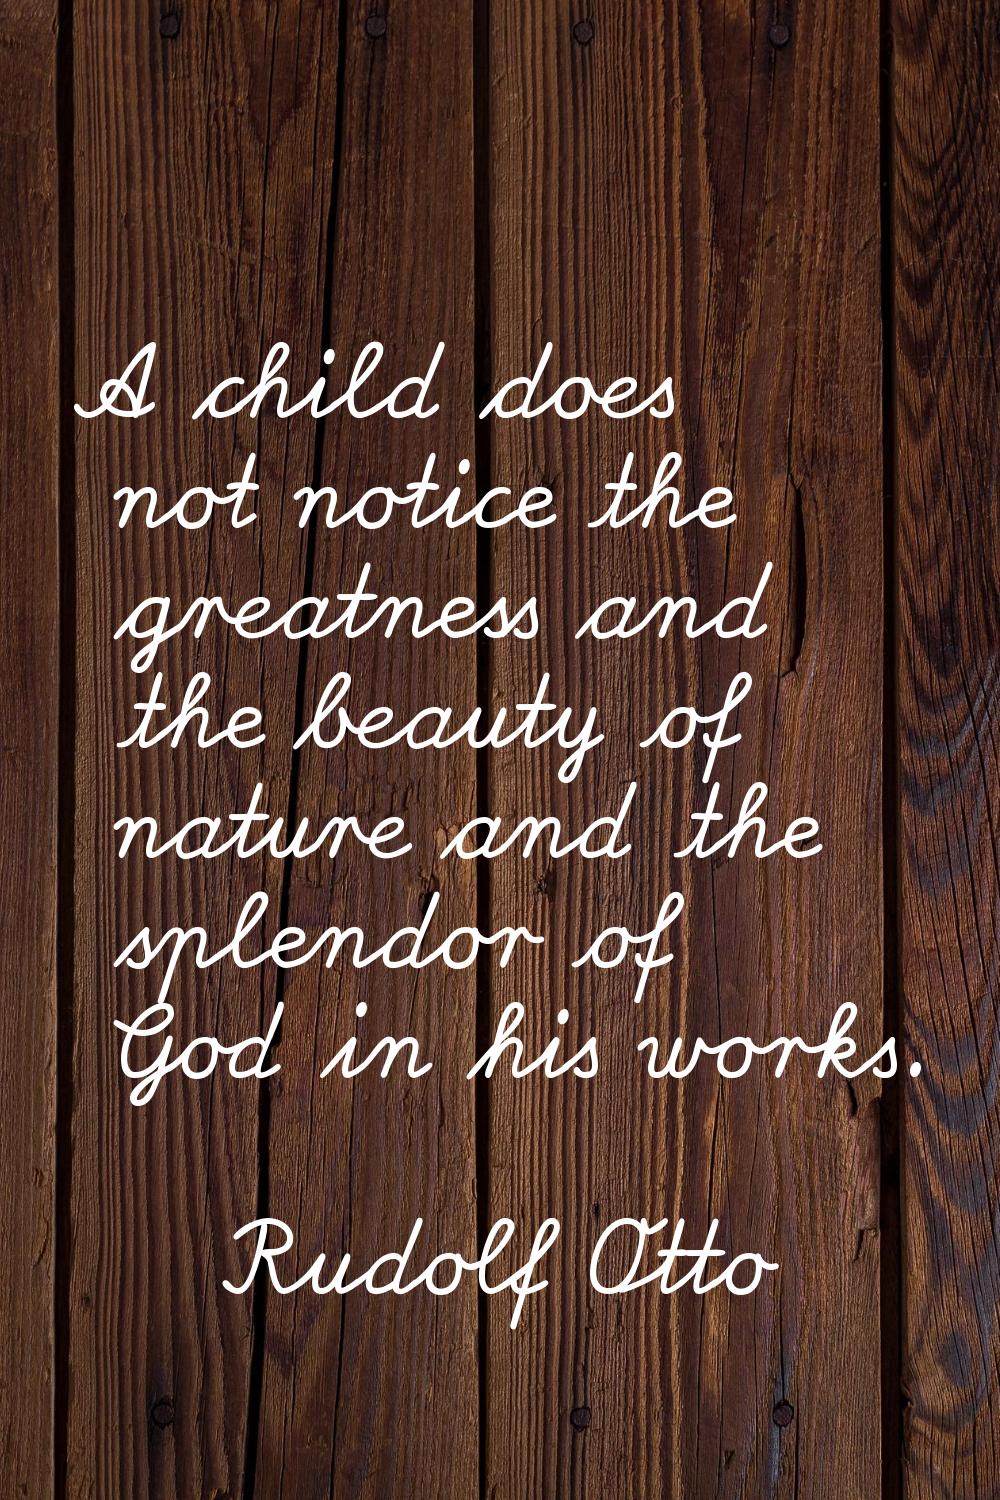 A child does not notice the greatness and the beauty of nature and the splendor of God in his works